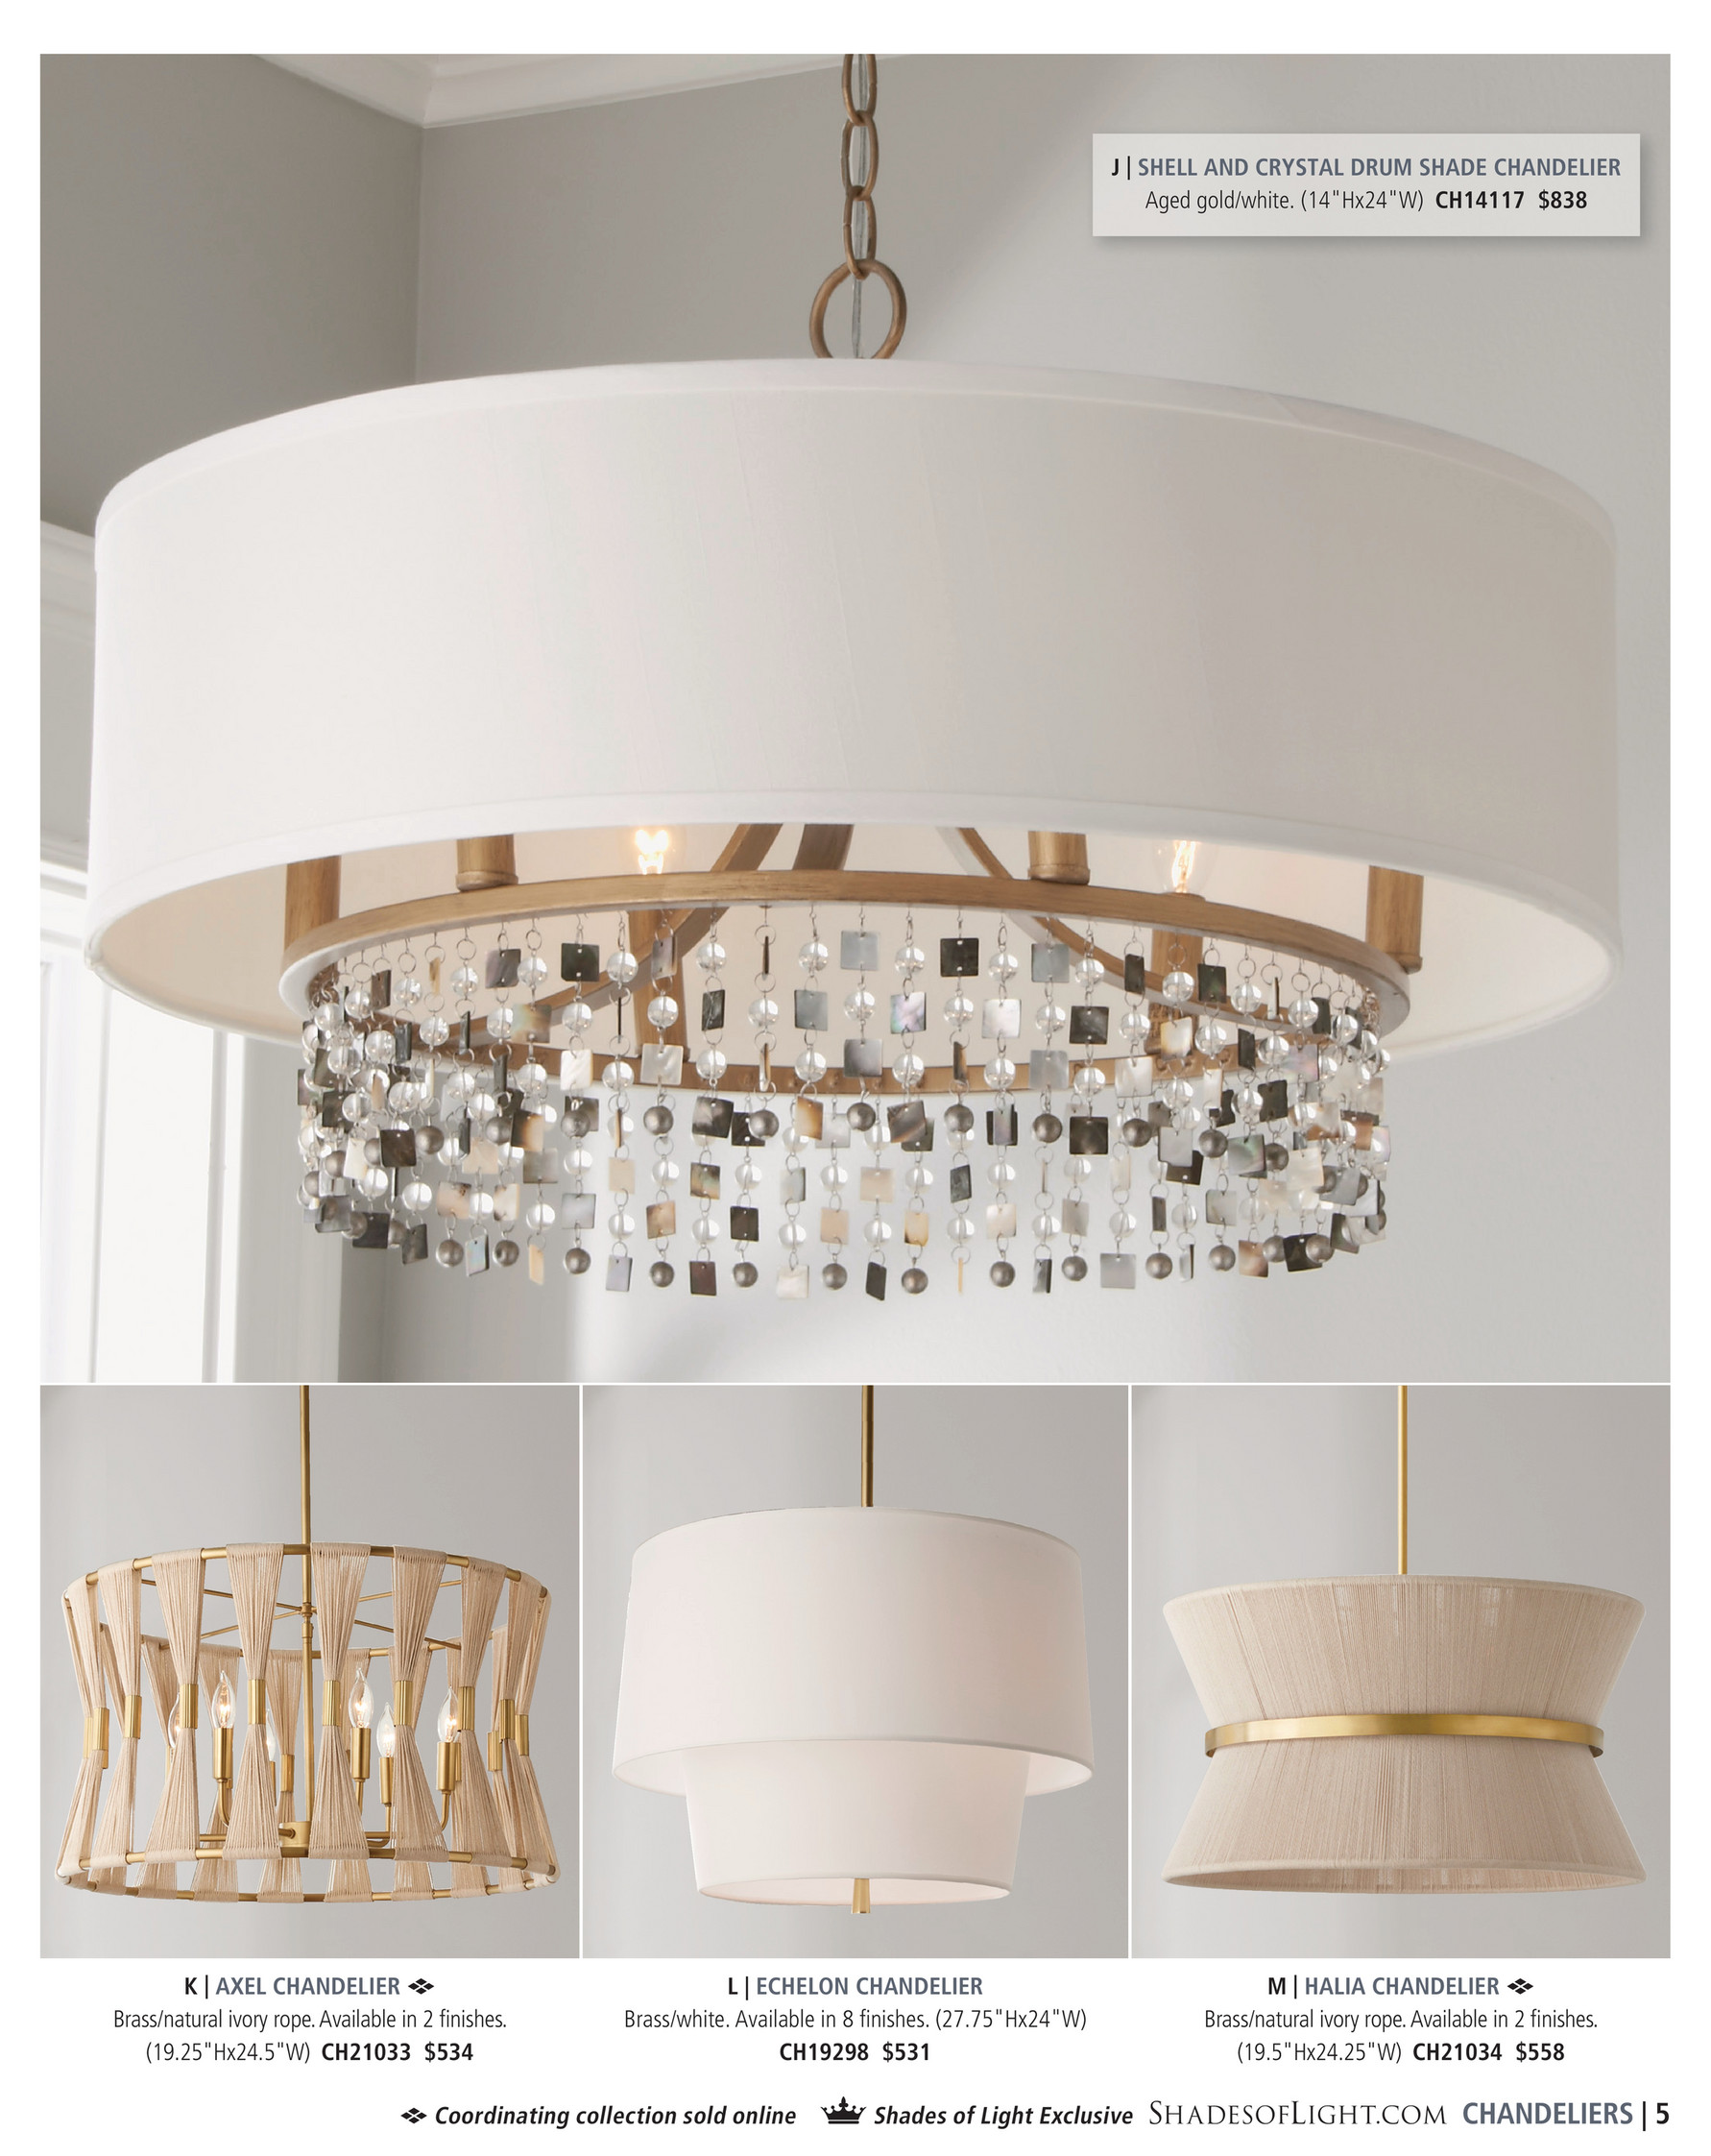 Shades of Light - Eclectic Luxury 2022 - Shell and Crystal Drum 